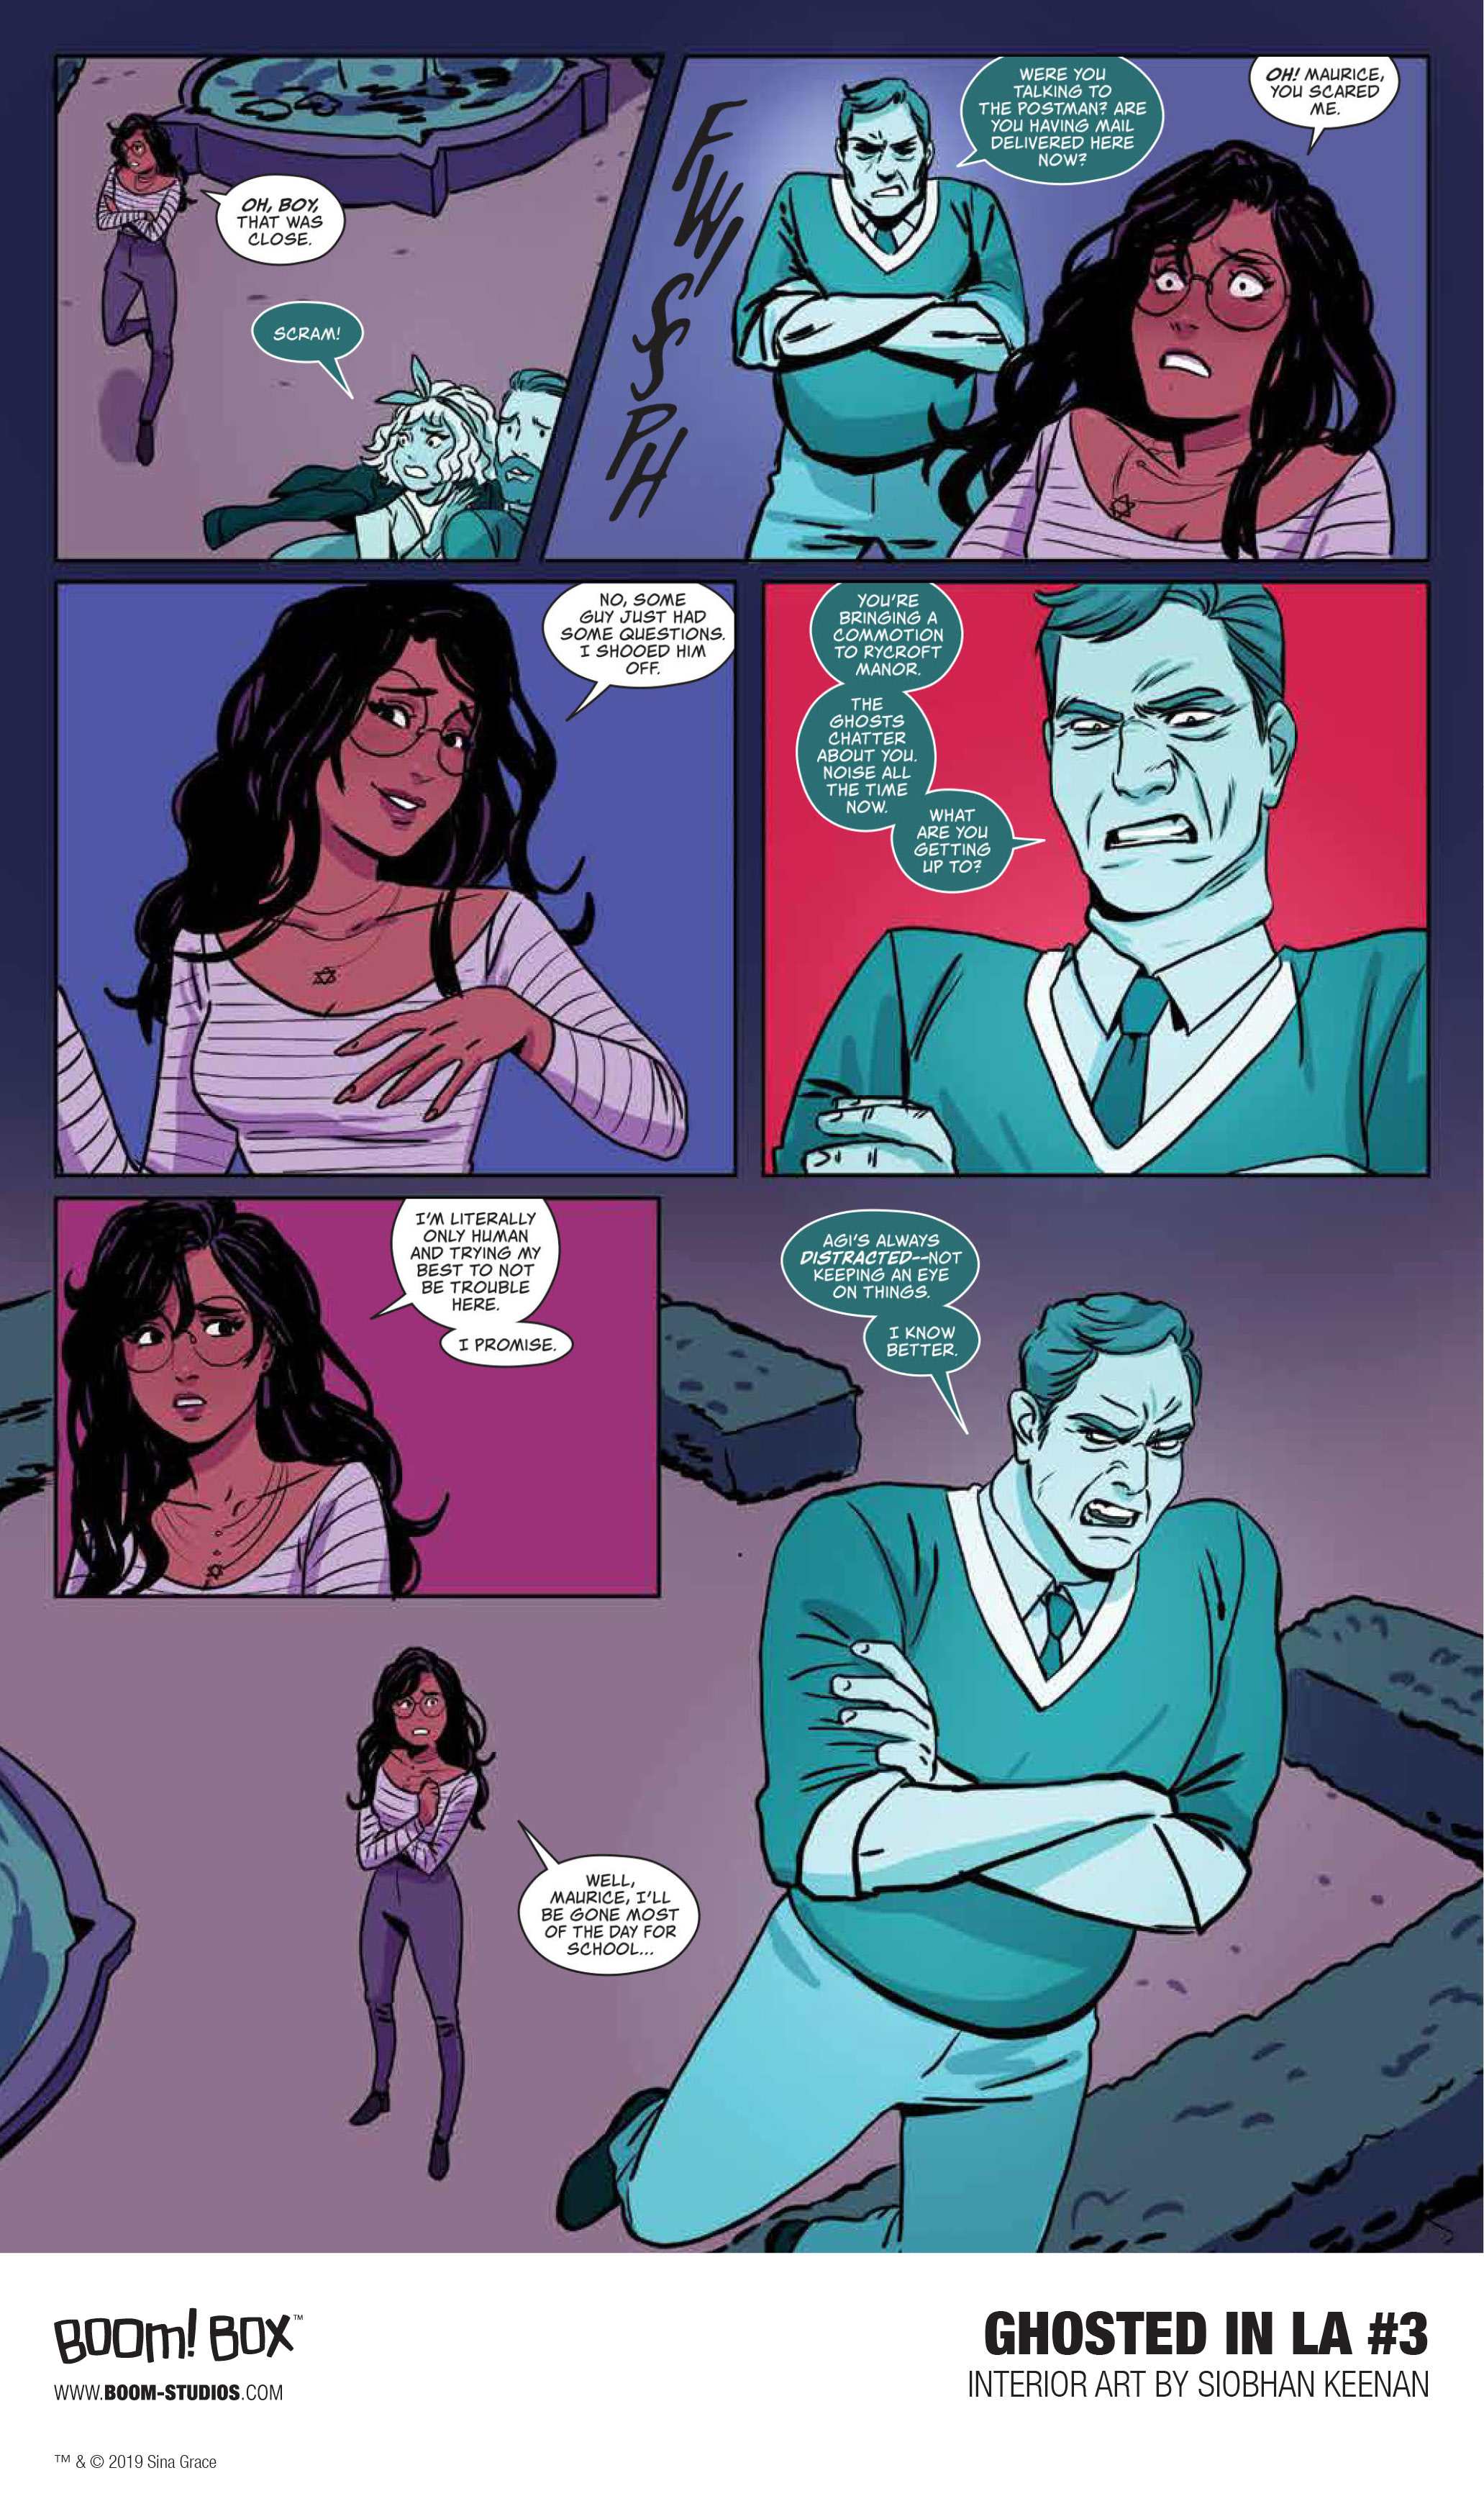 Ghosted in L.A. #3 preview page 4